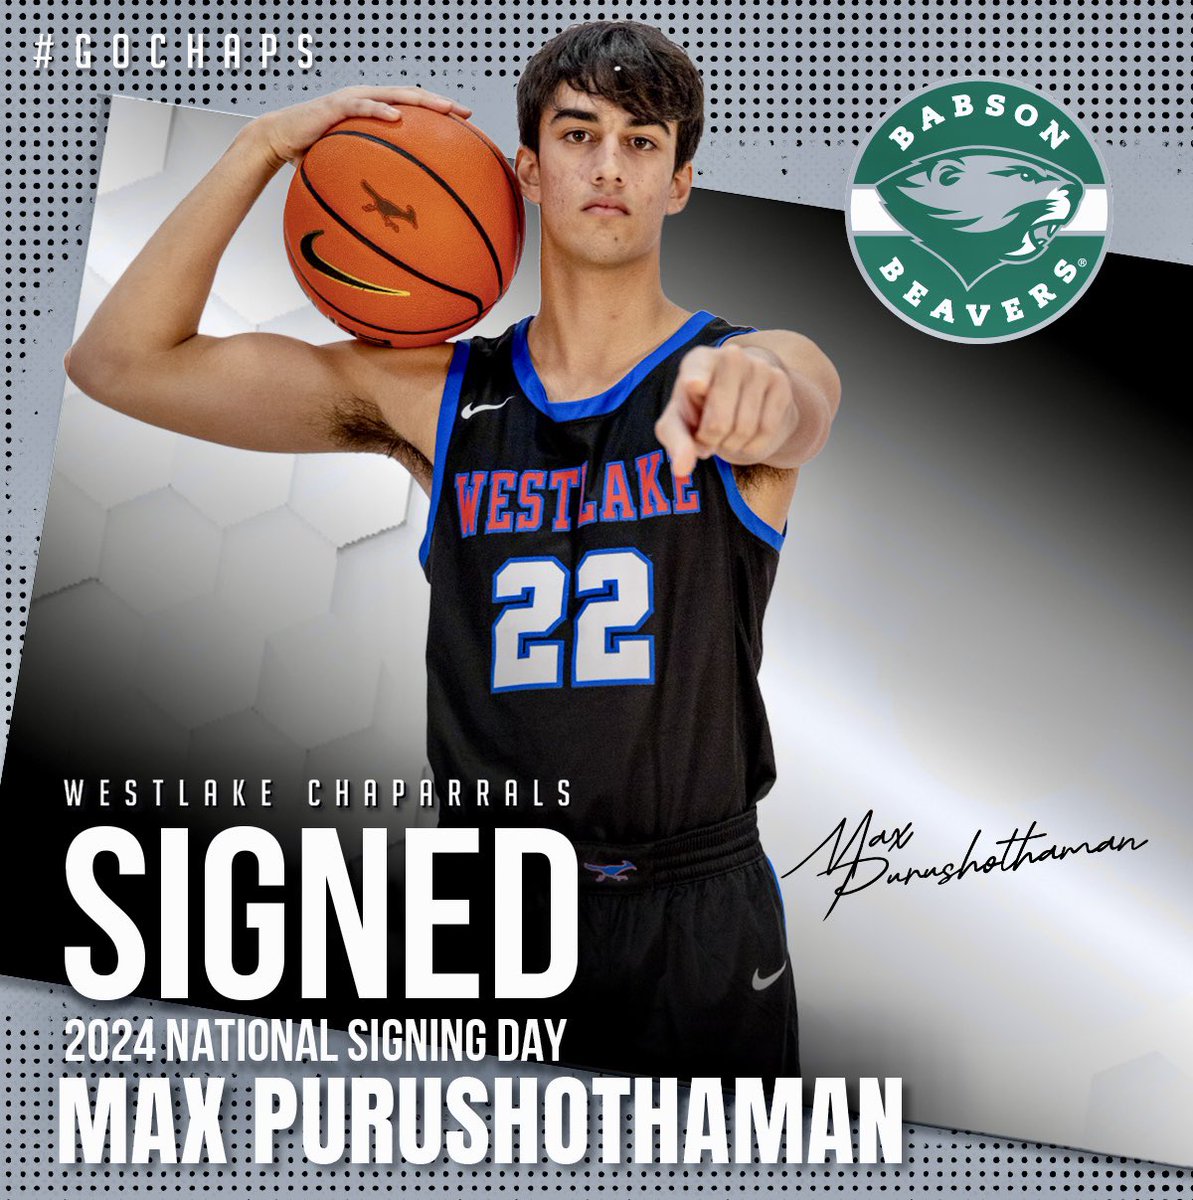 Congratulations to Max Purushothaman as he will continue his academic and basketball career at Babson College in Massachusetts. #GoBabo #GoChaps